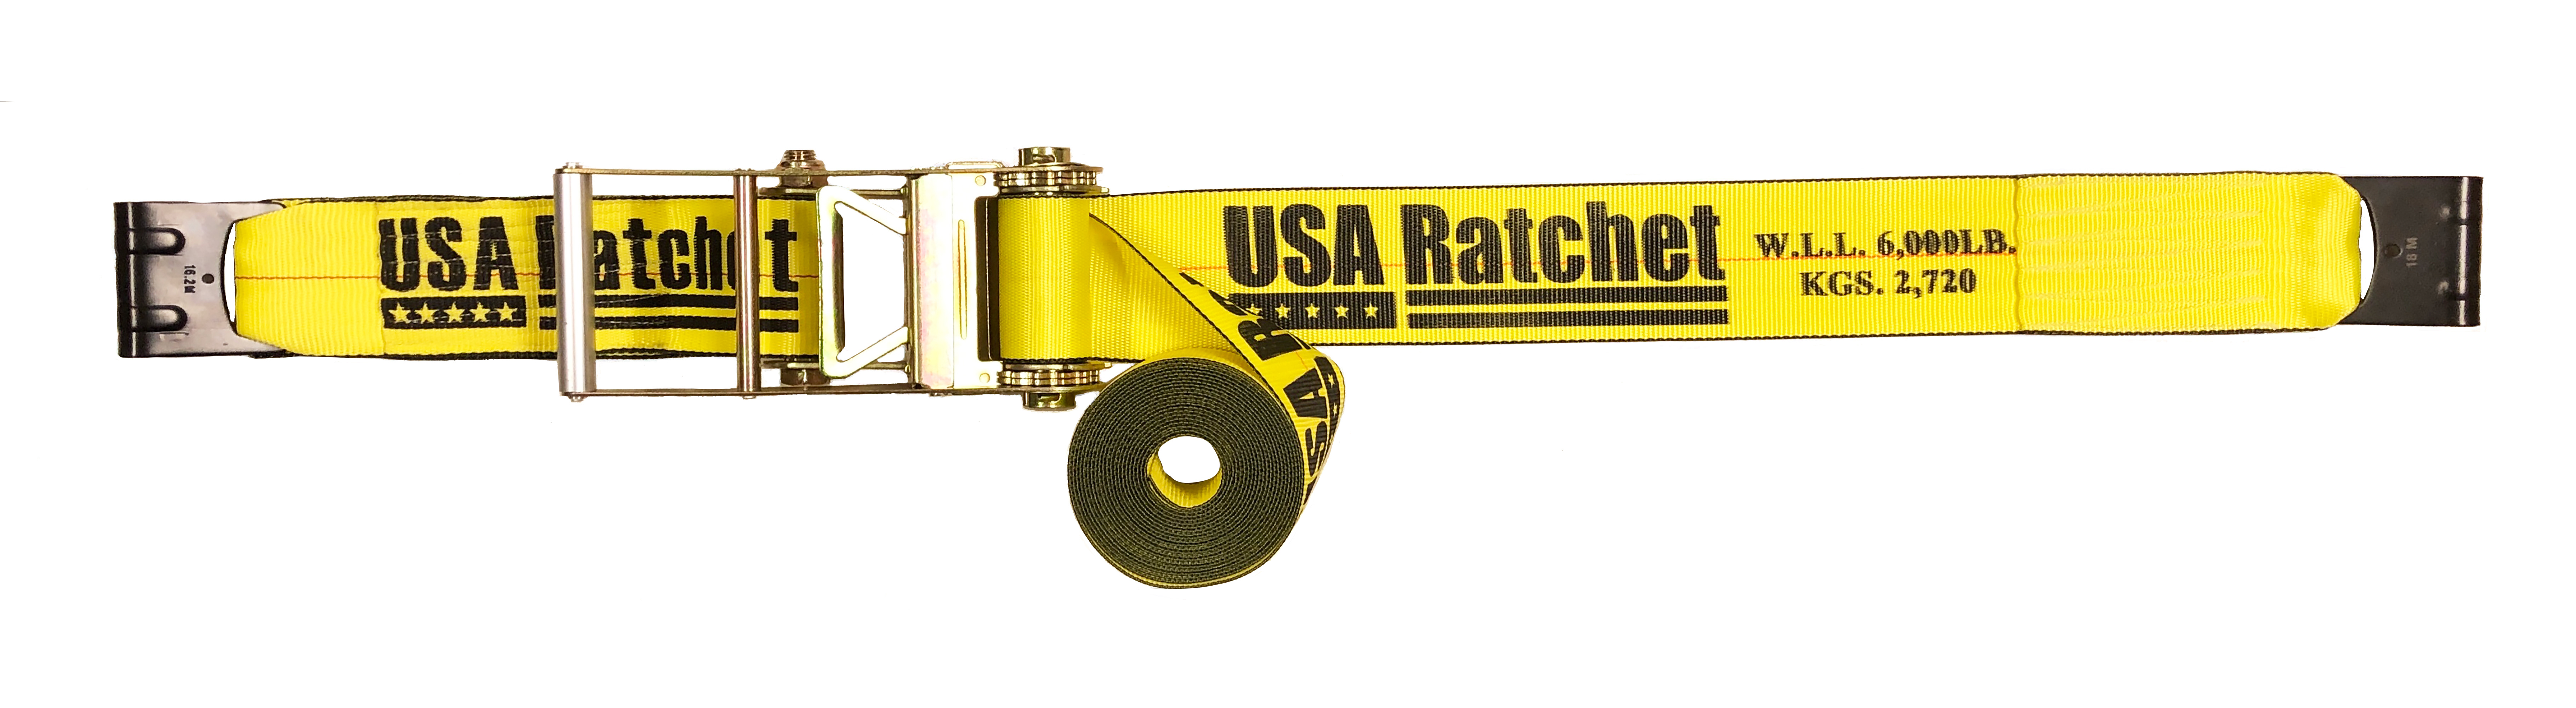 USA Ratchet  Auto Hauling & Towing Products